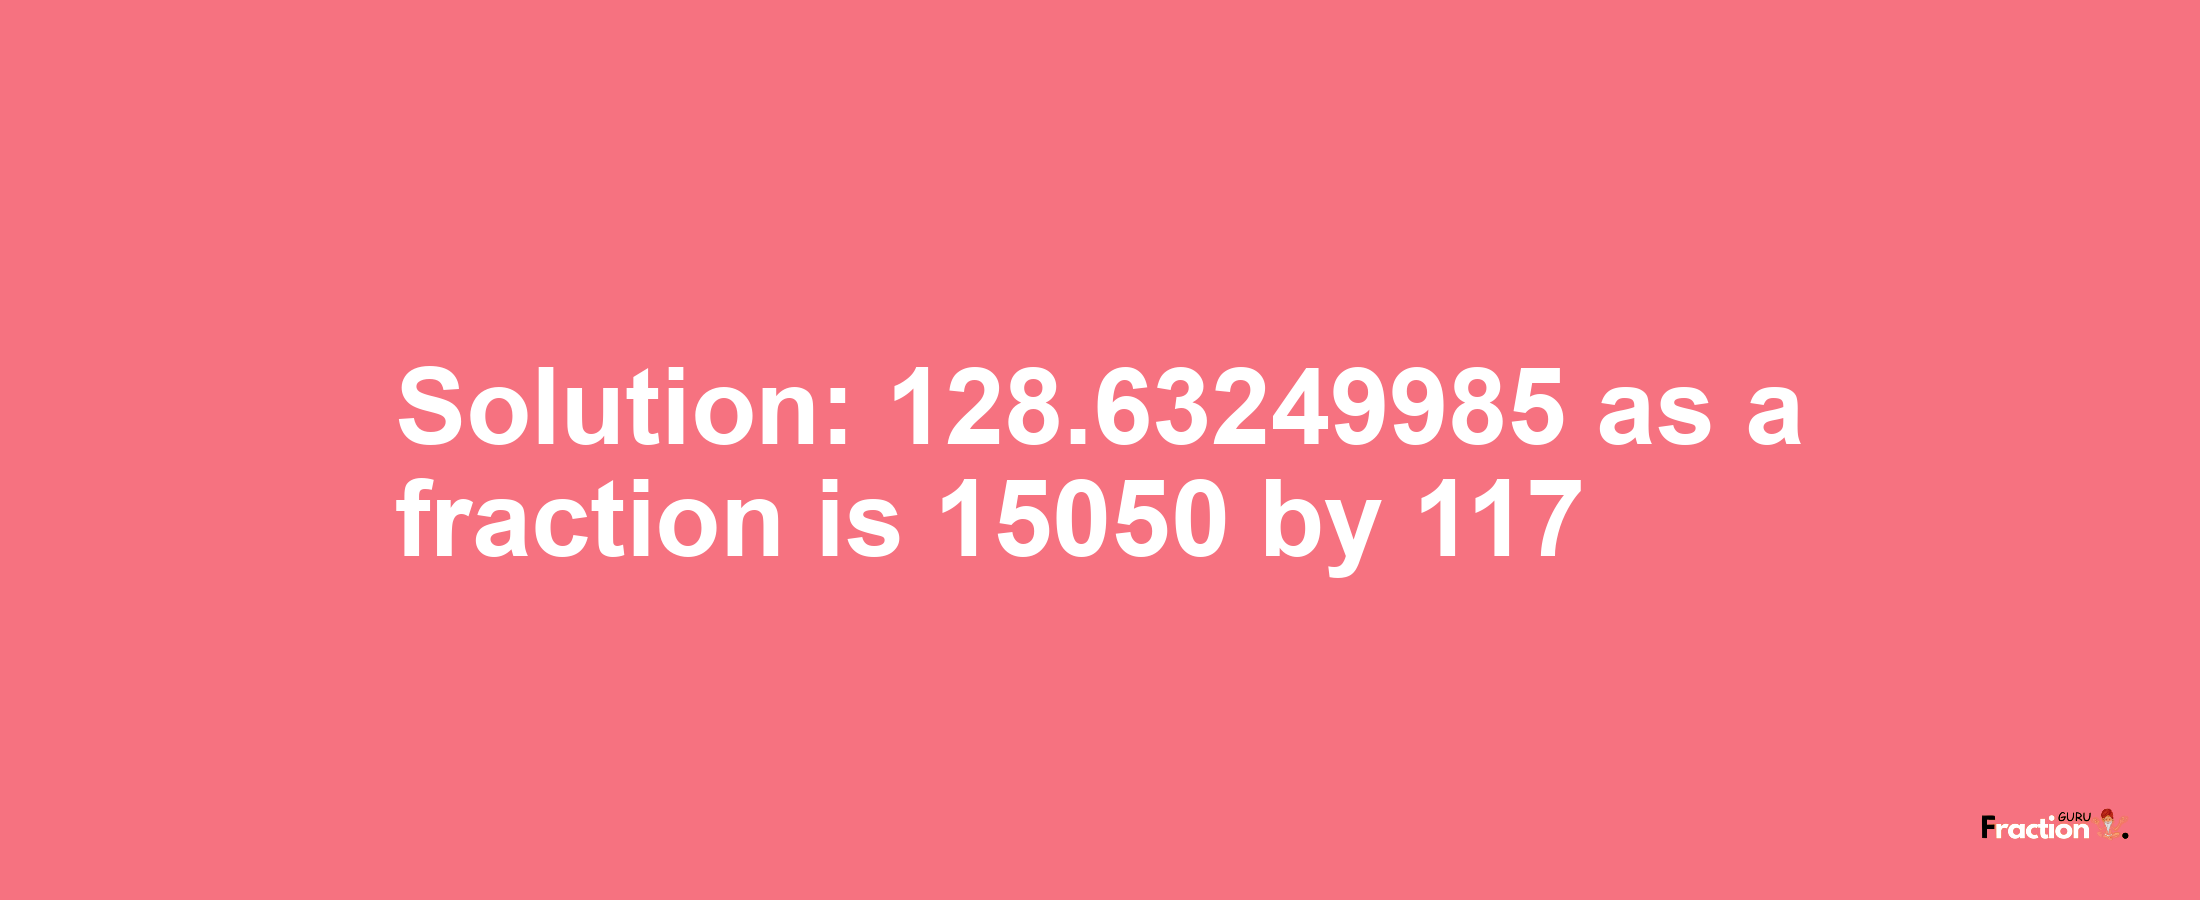 Solution:128.63249985 as a fraction is 15050/117